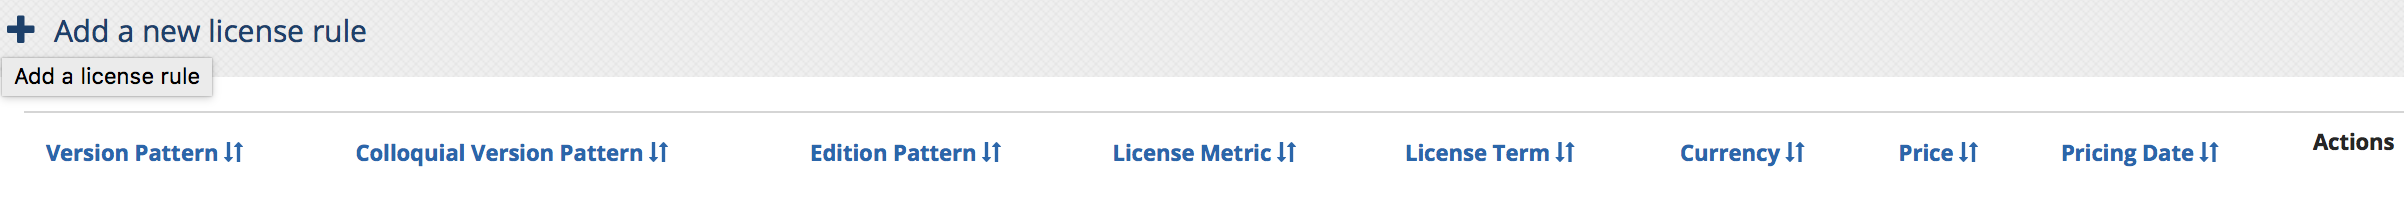 Add a new license rule